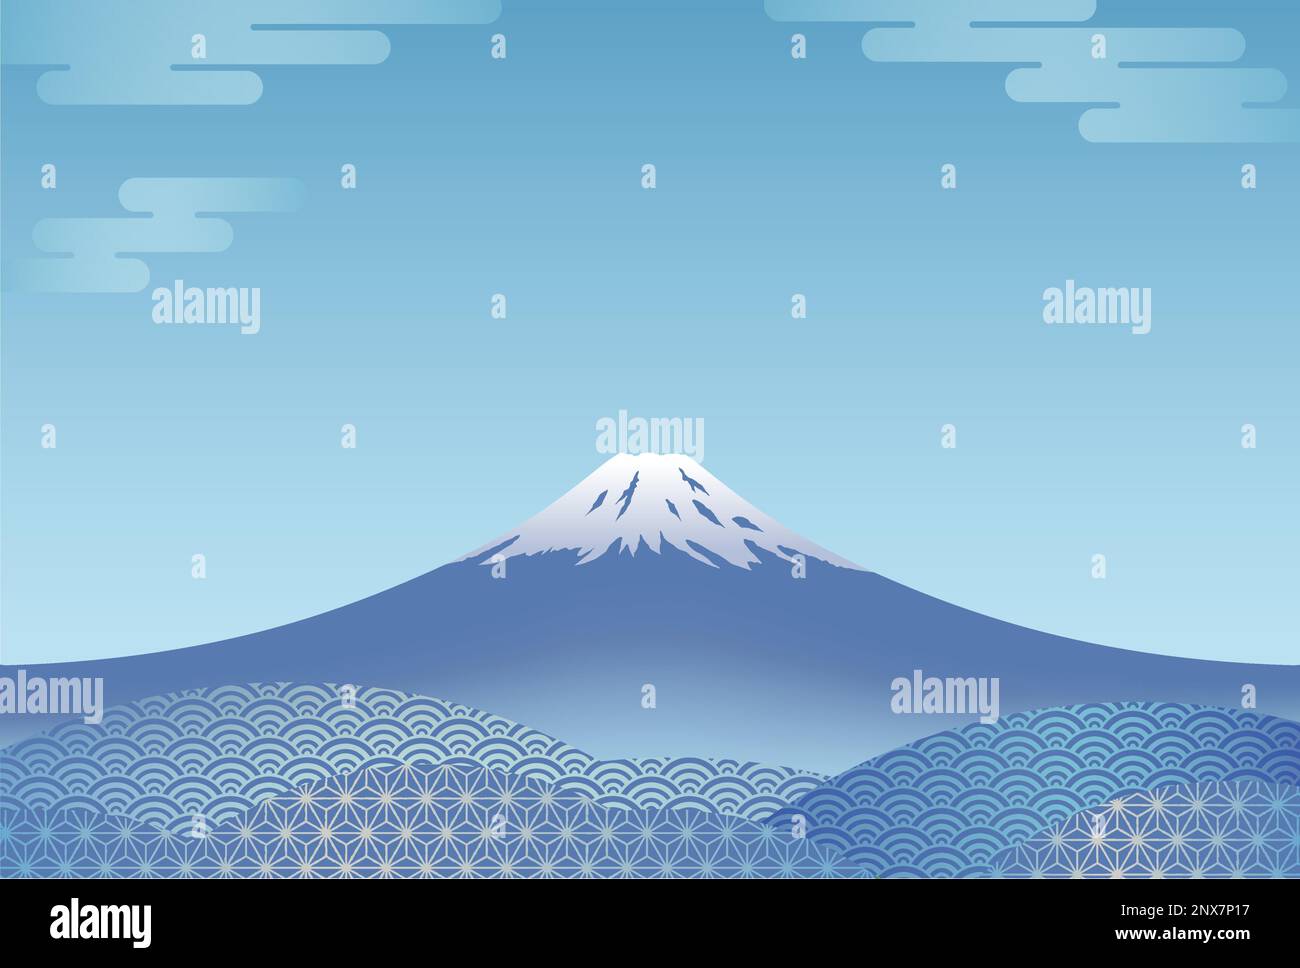 Vector New Year’s Greeting Card Template With Blue Mt. Fuji. Stock Vector